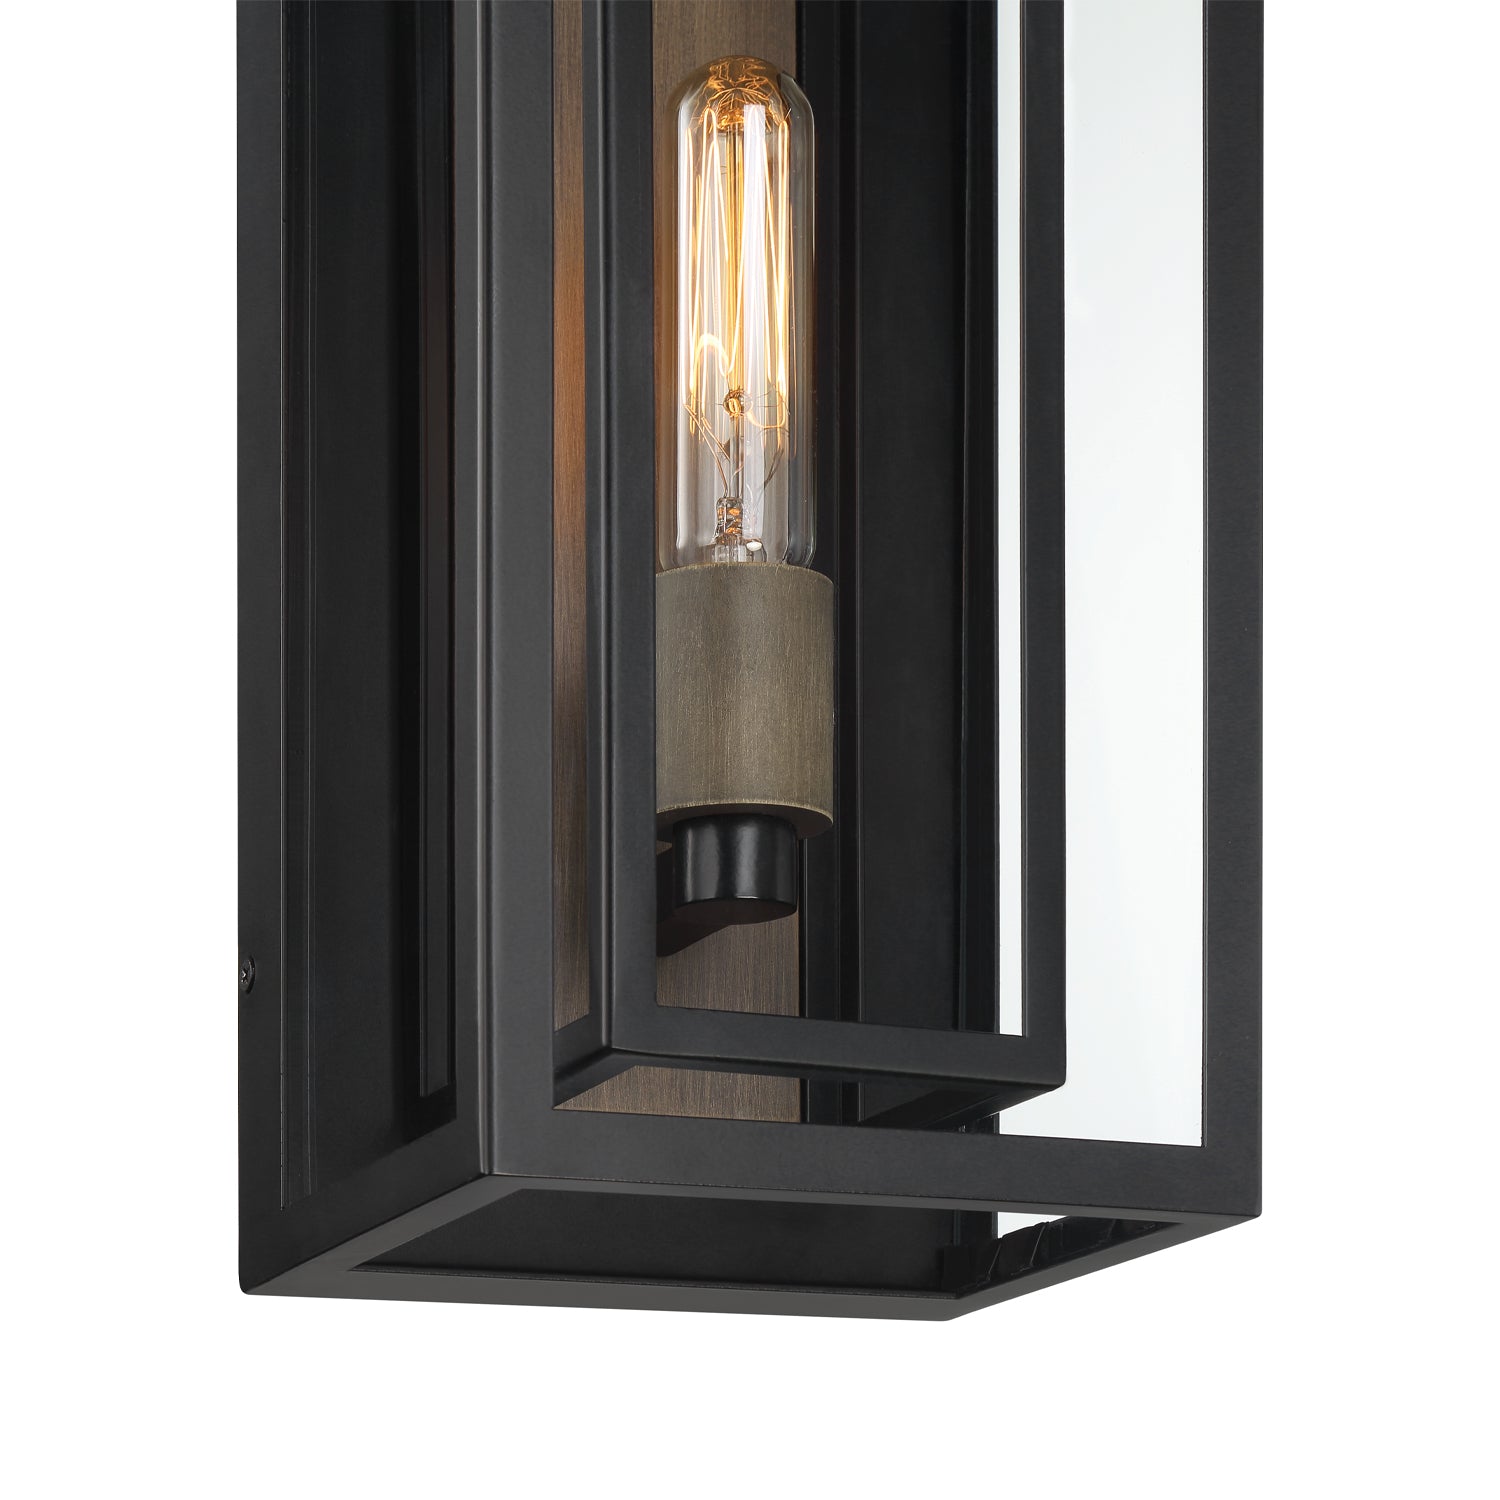 Jaxon Outdoor Wall Light, Matte Black with Brass Accents